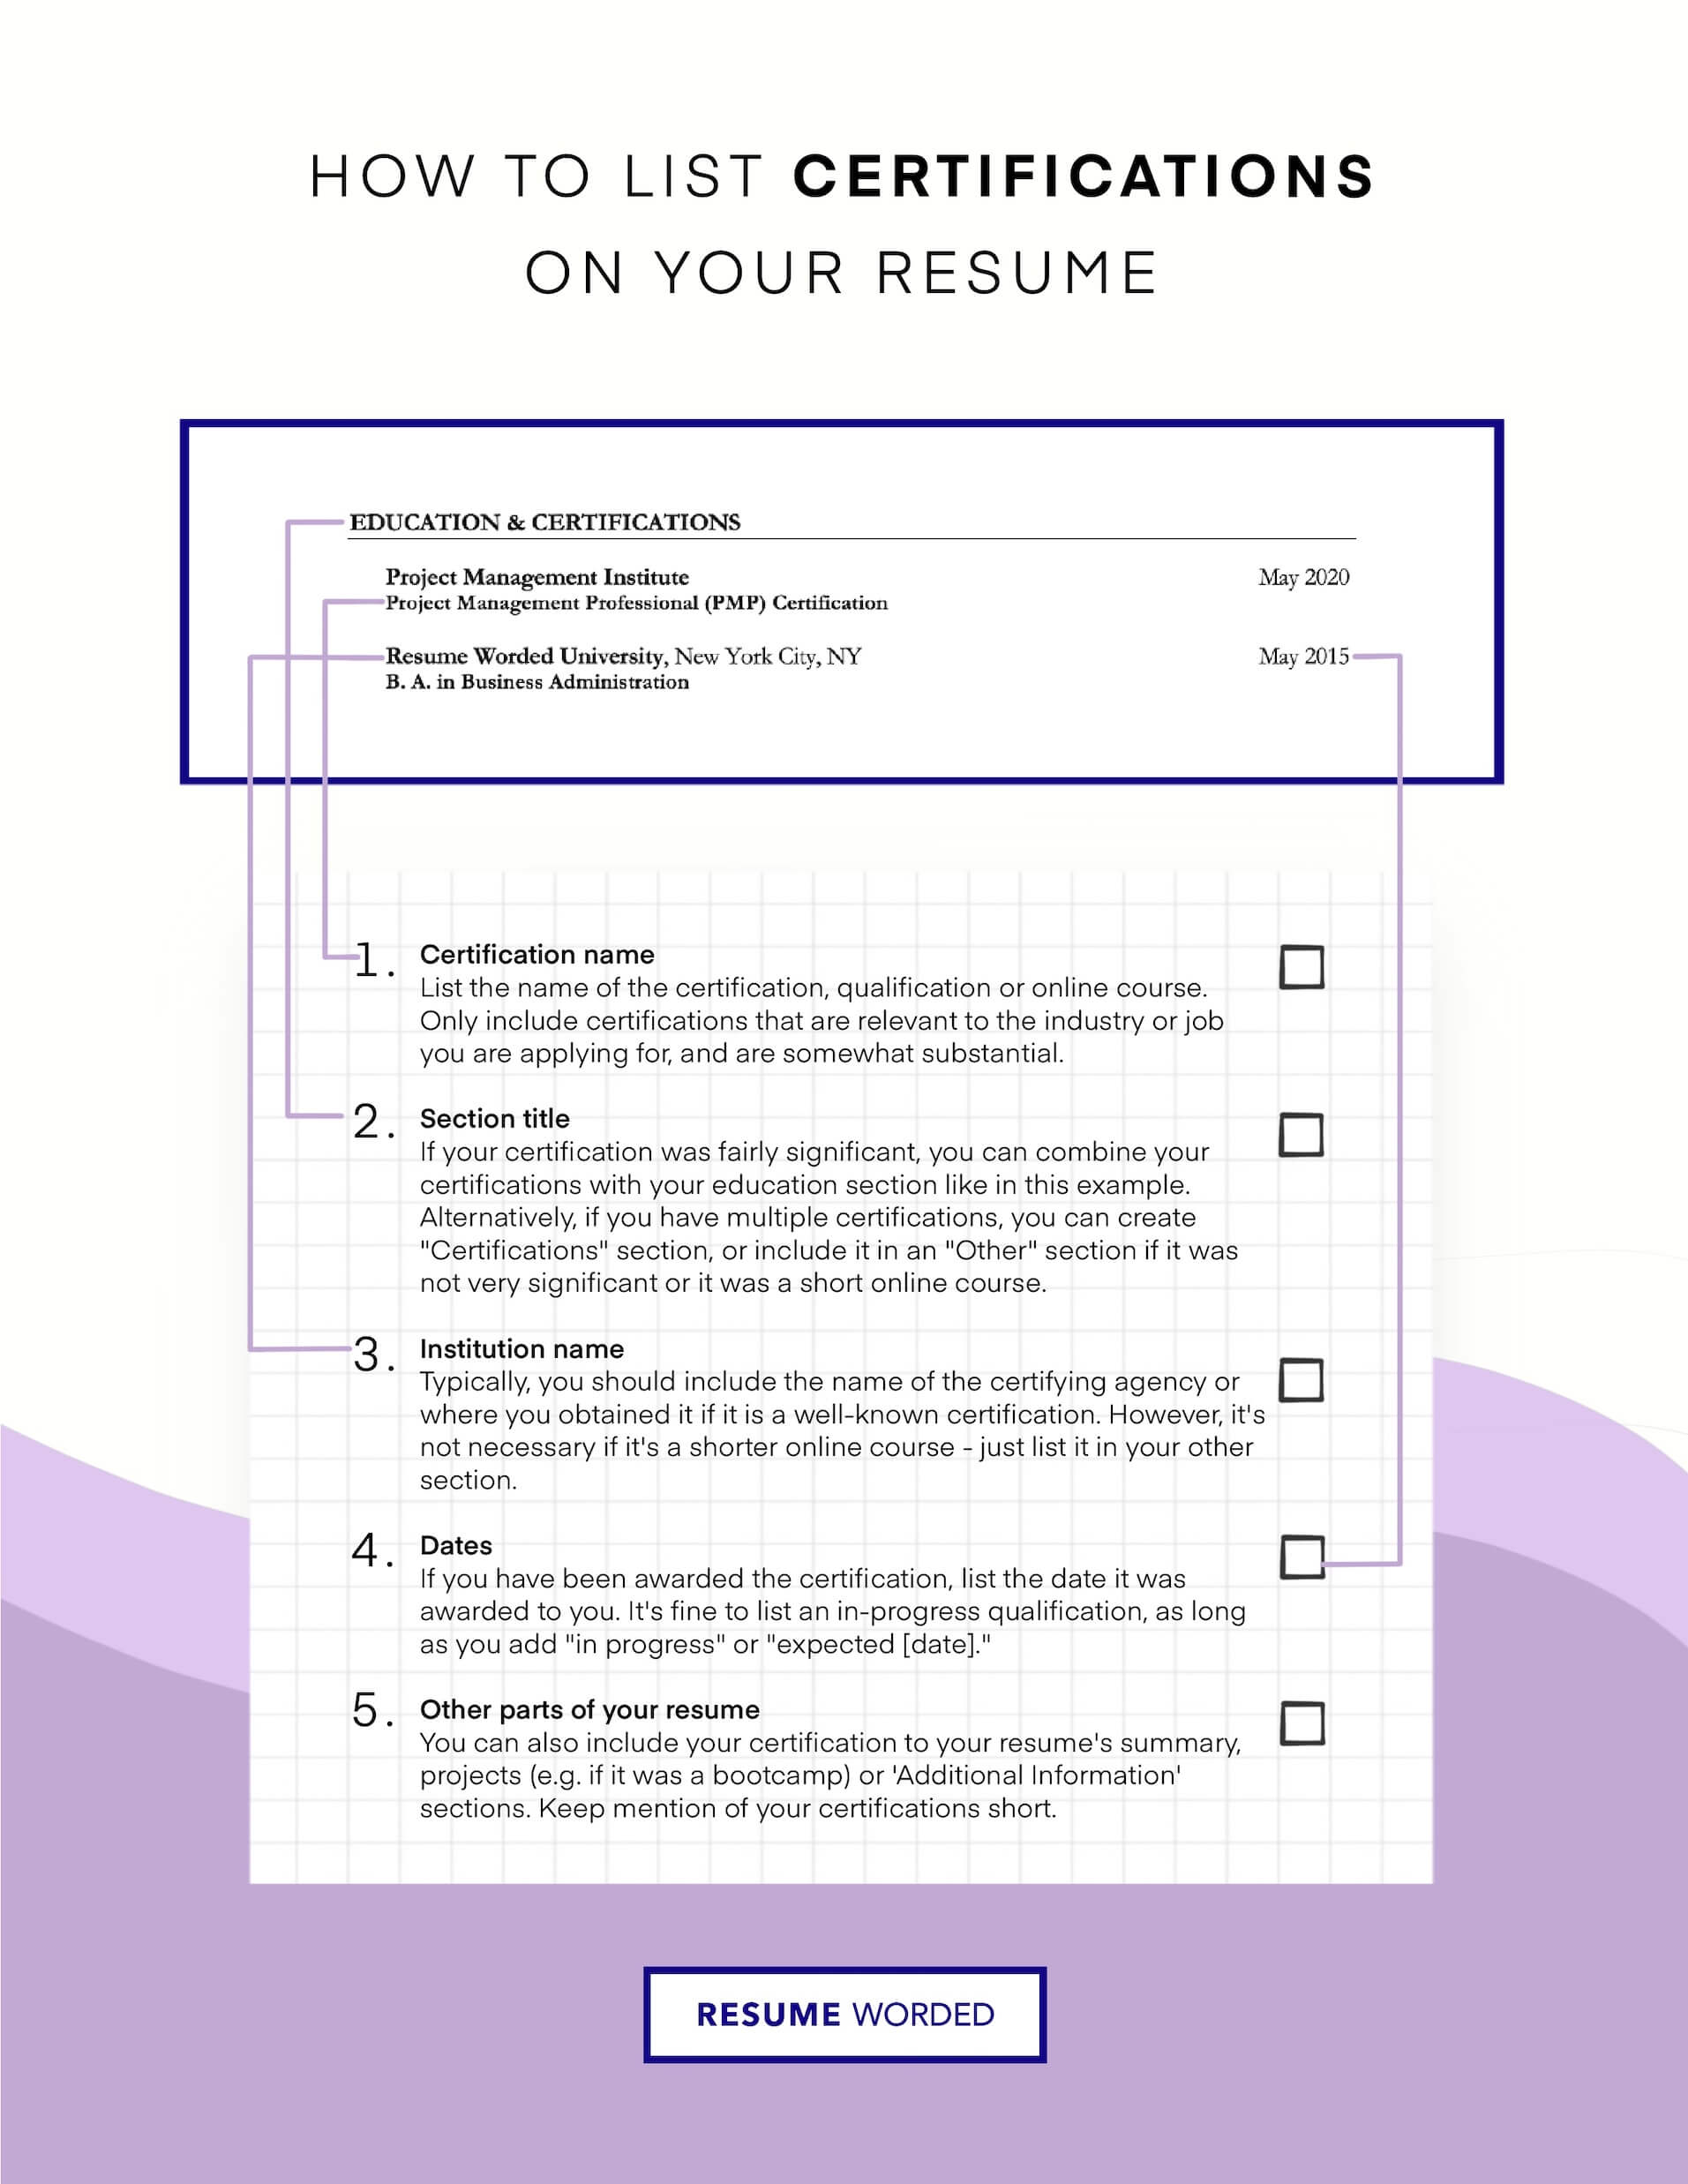 Include relevant certifications - Case Manager CV